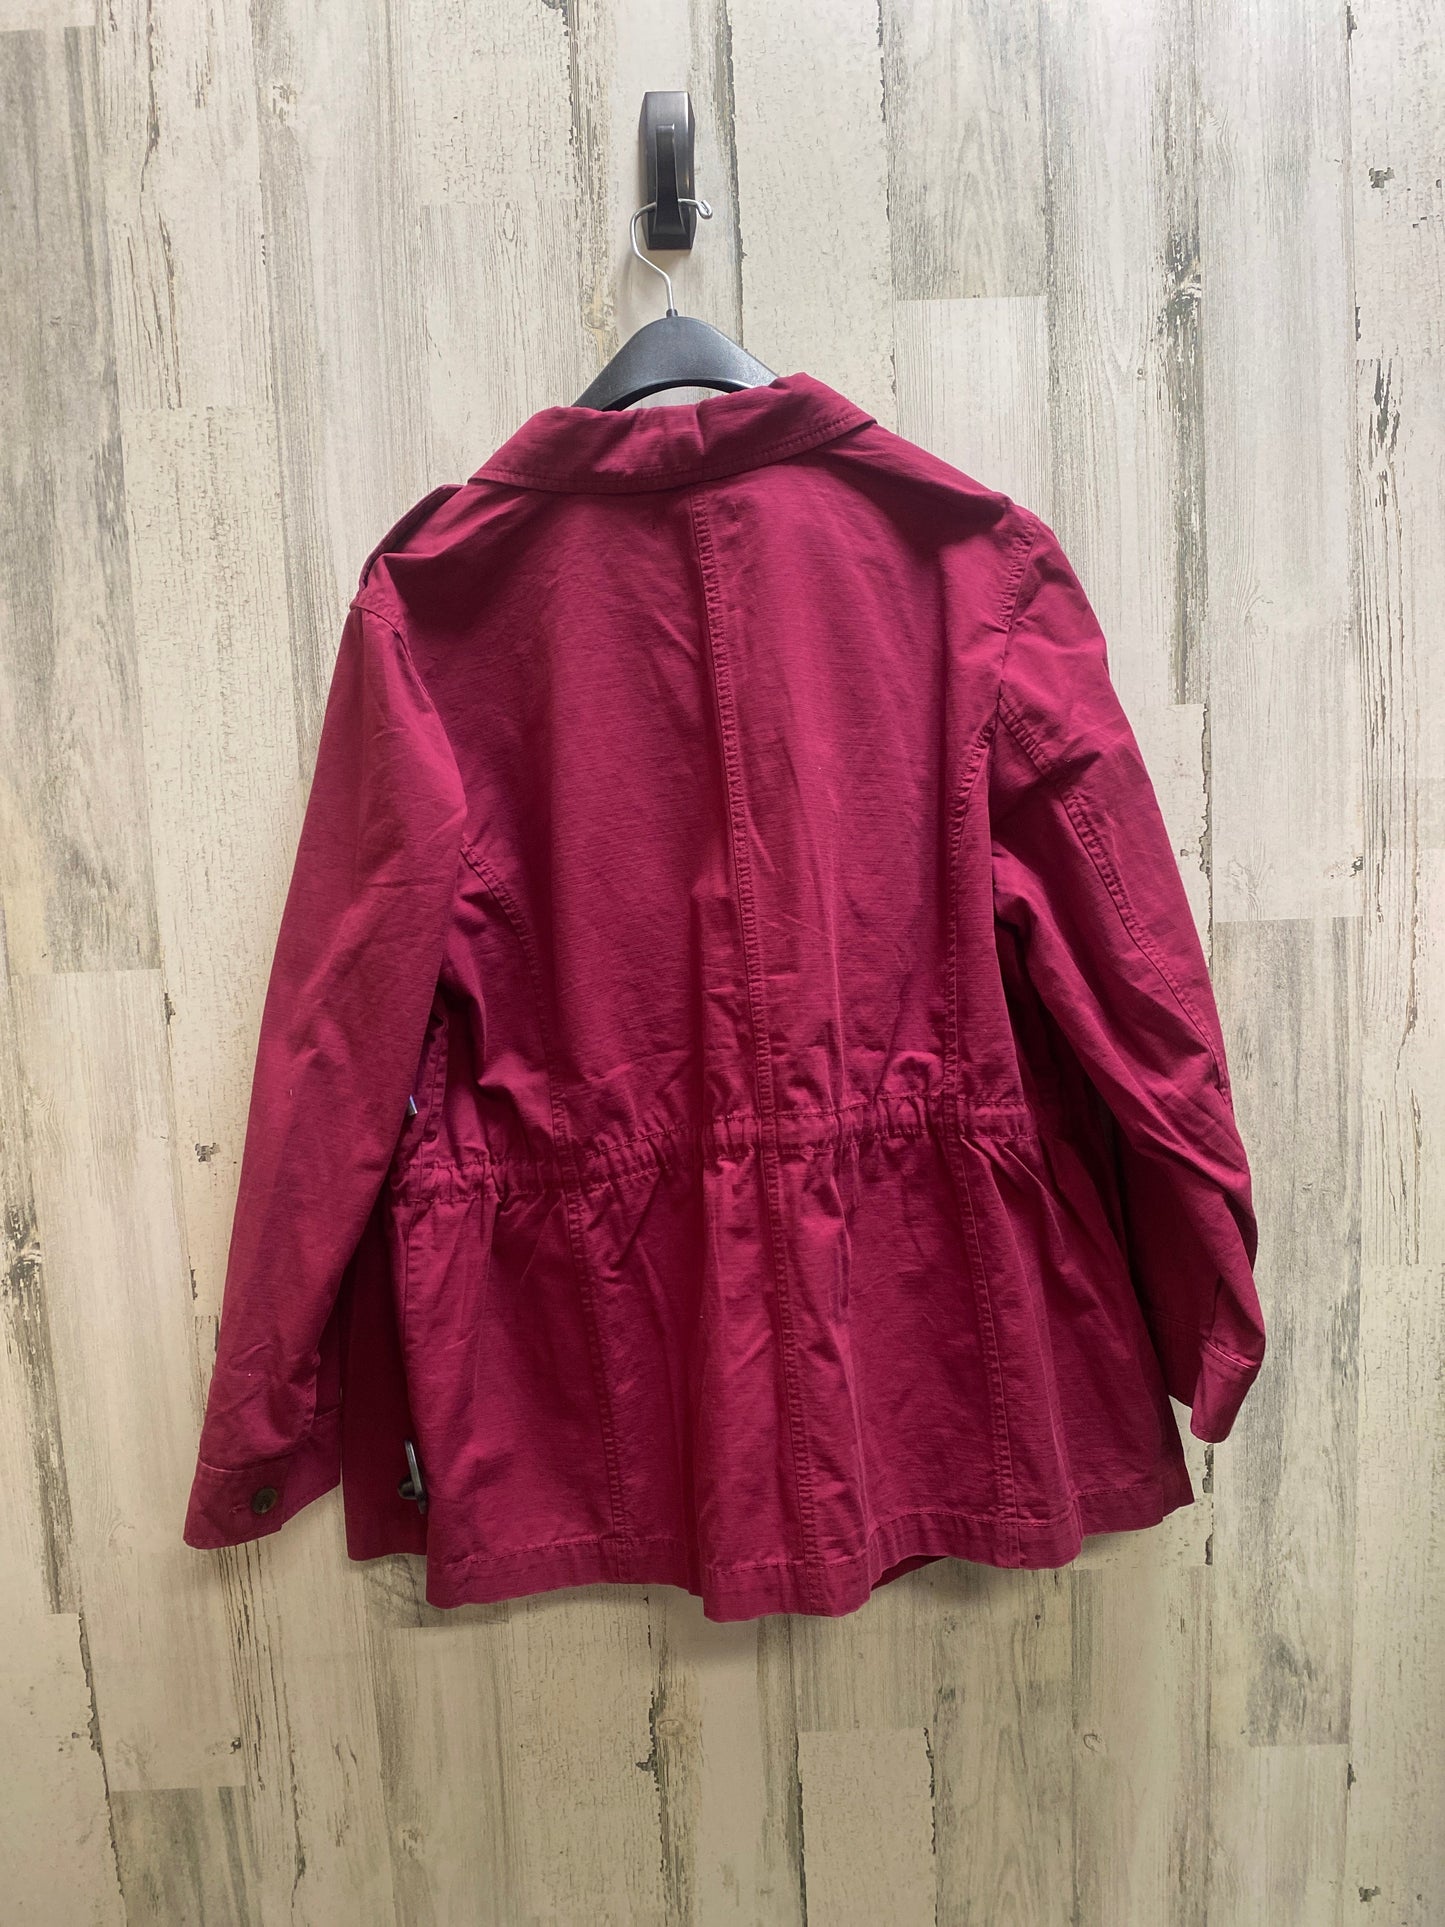 Jacket Other By Talbots  Size: 2x